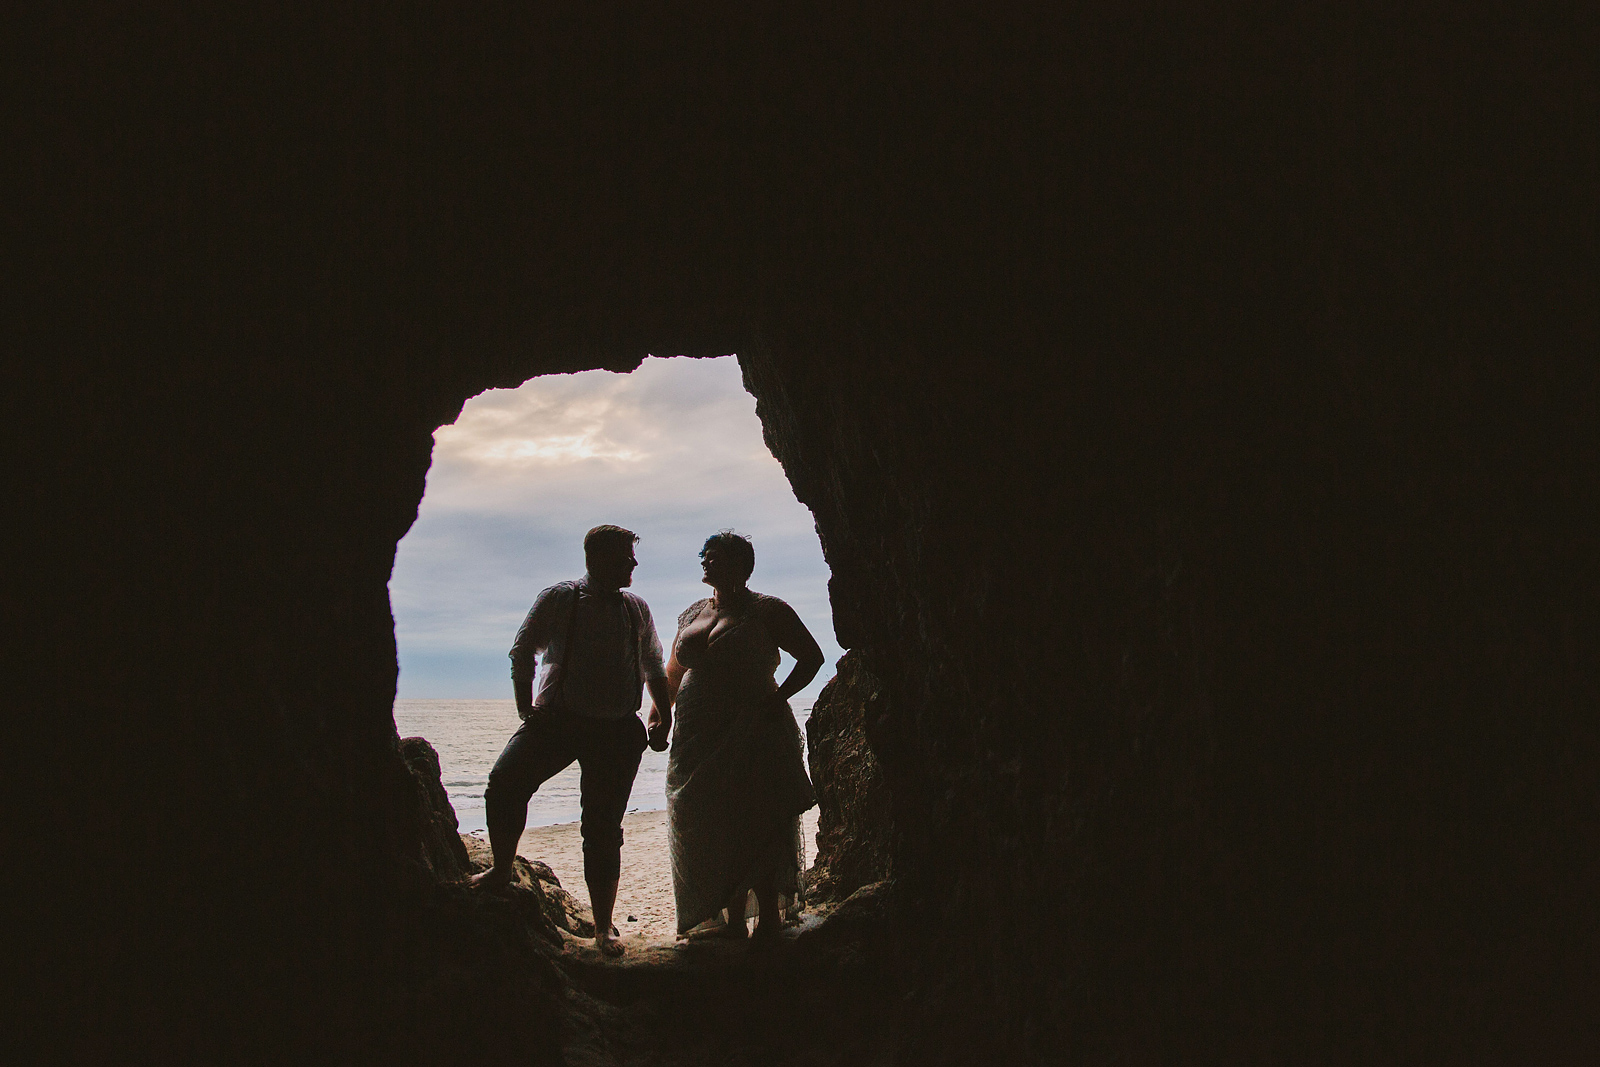 Creative portrait of the bride and groom's silhouettes standing in front of the entrance to a cave - Oceanside Community Club Wedding” title=